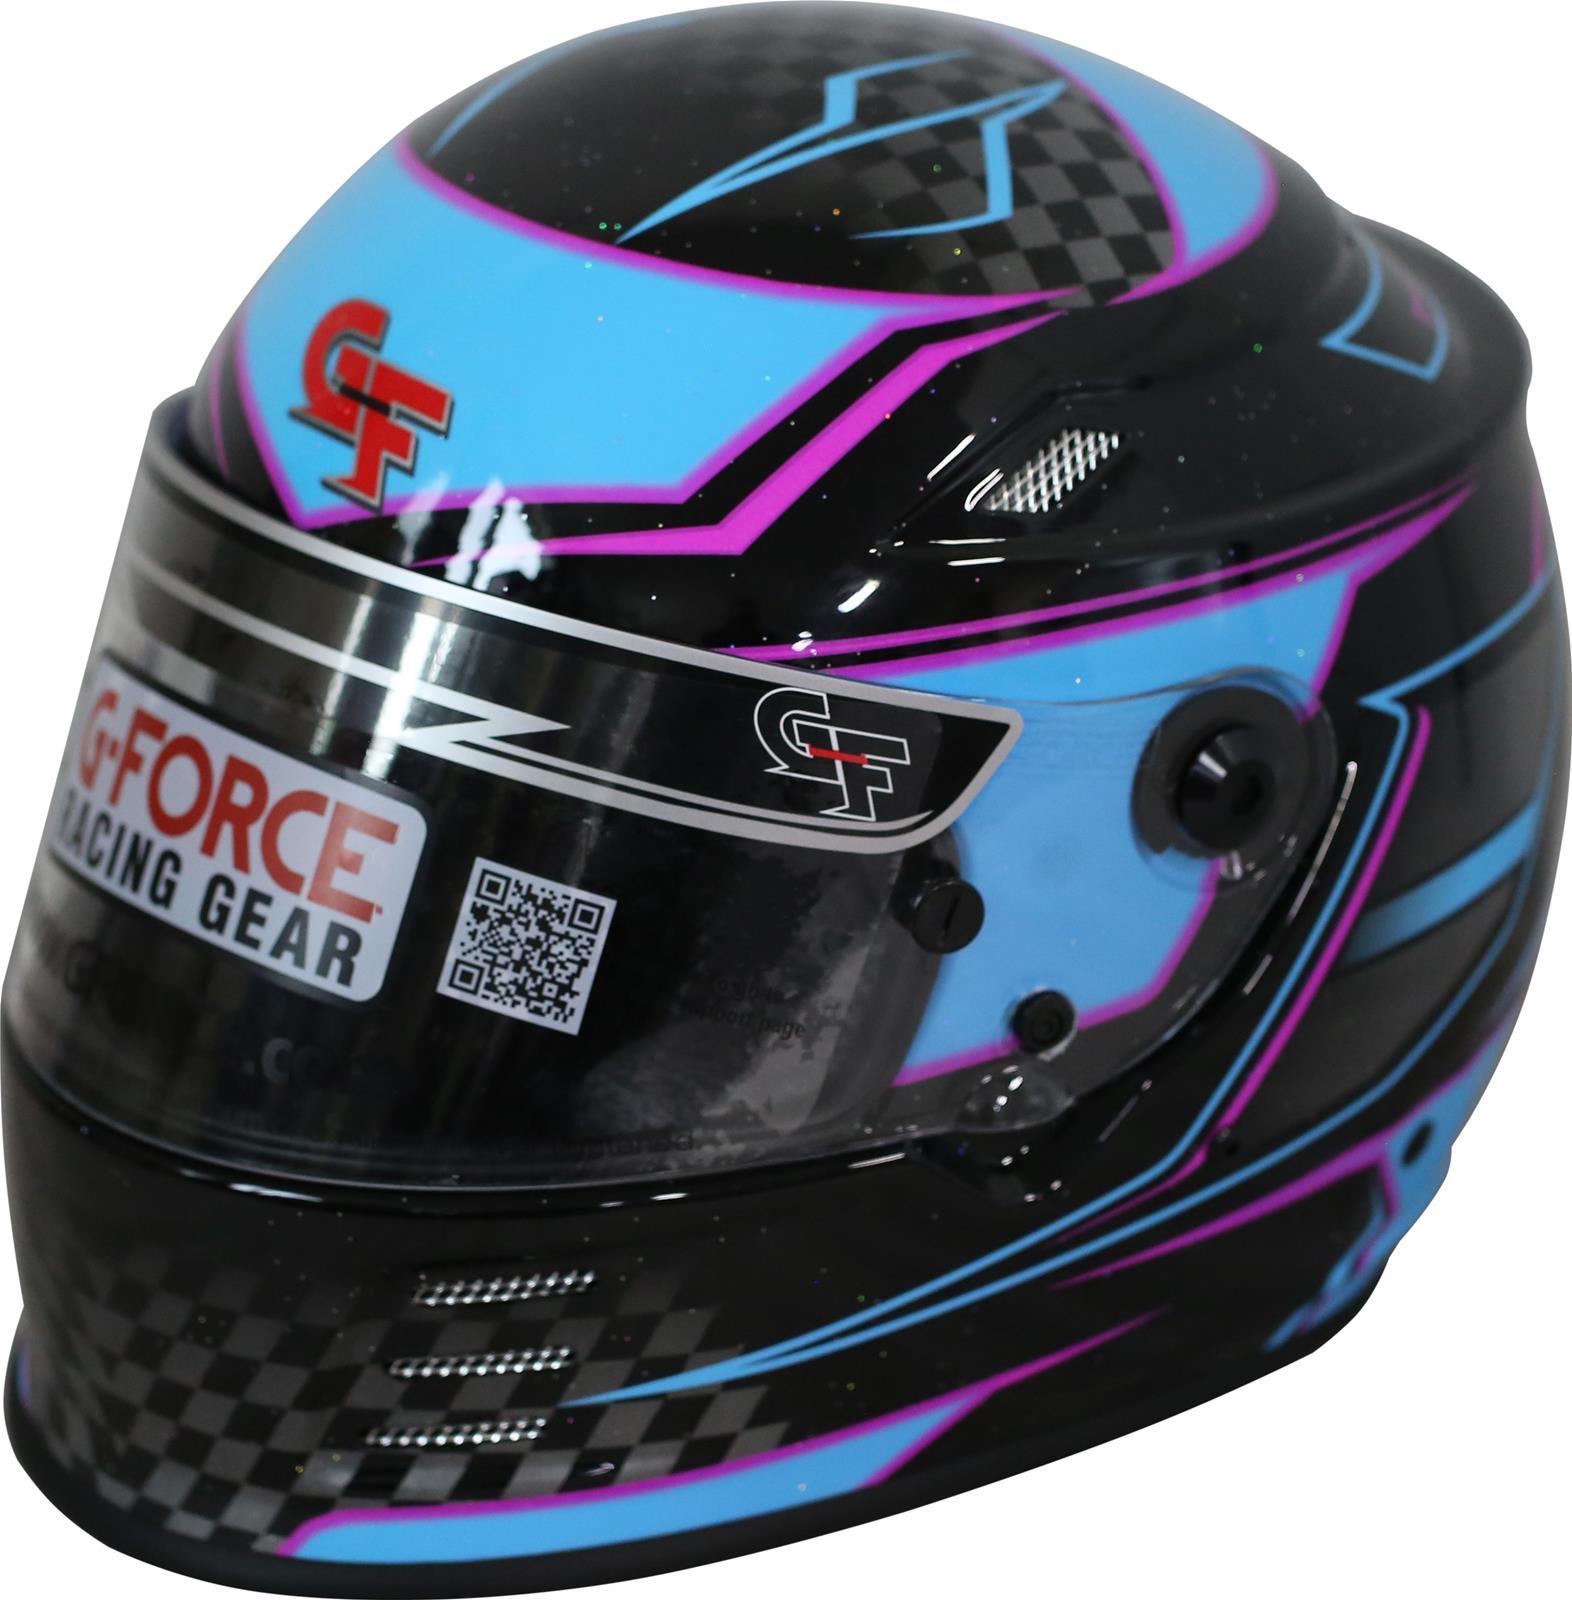 G-Force Racing Gear 13005LRGBU Helmet, Revo Graphics, Full Face, Snell SA2020, Head and Neck Support Ready, Black / Blue, Large, Each